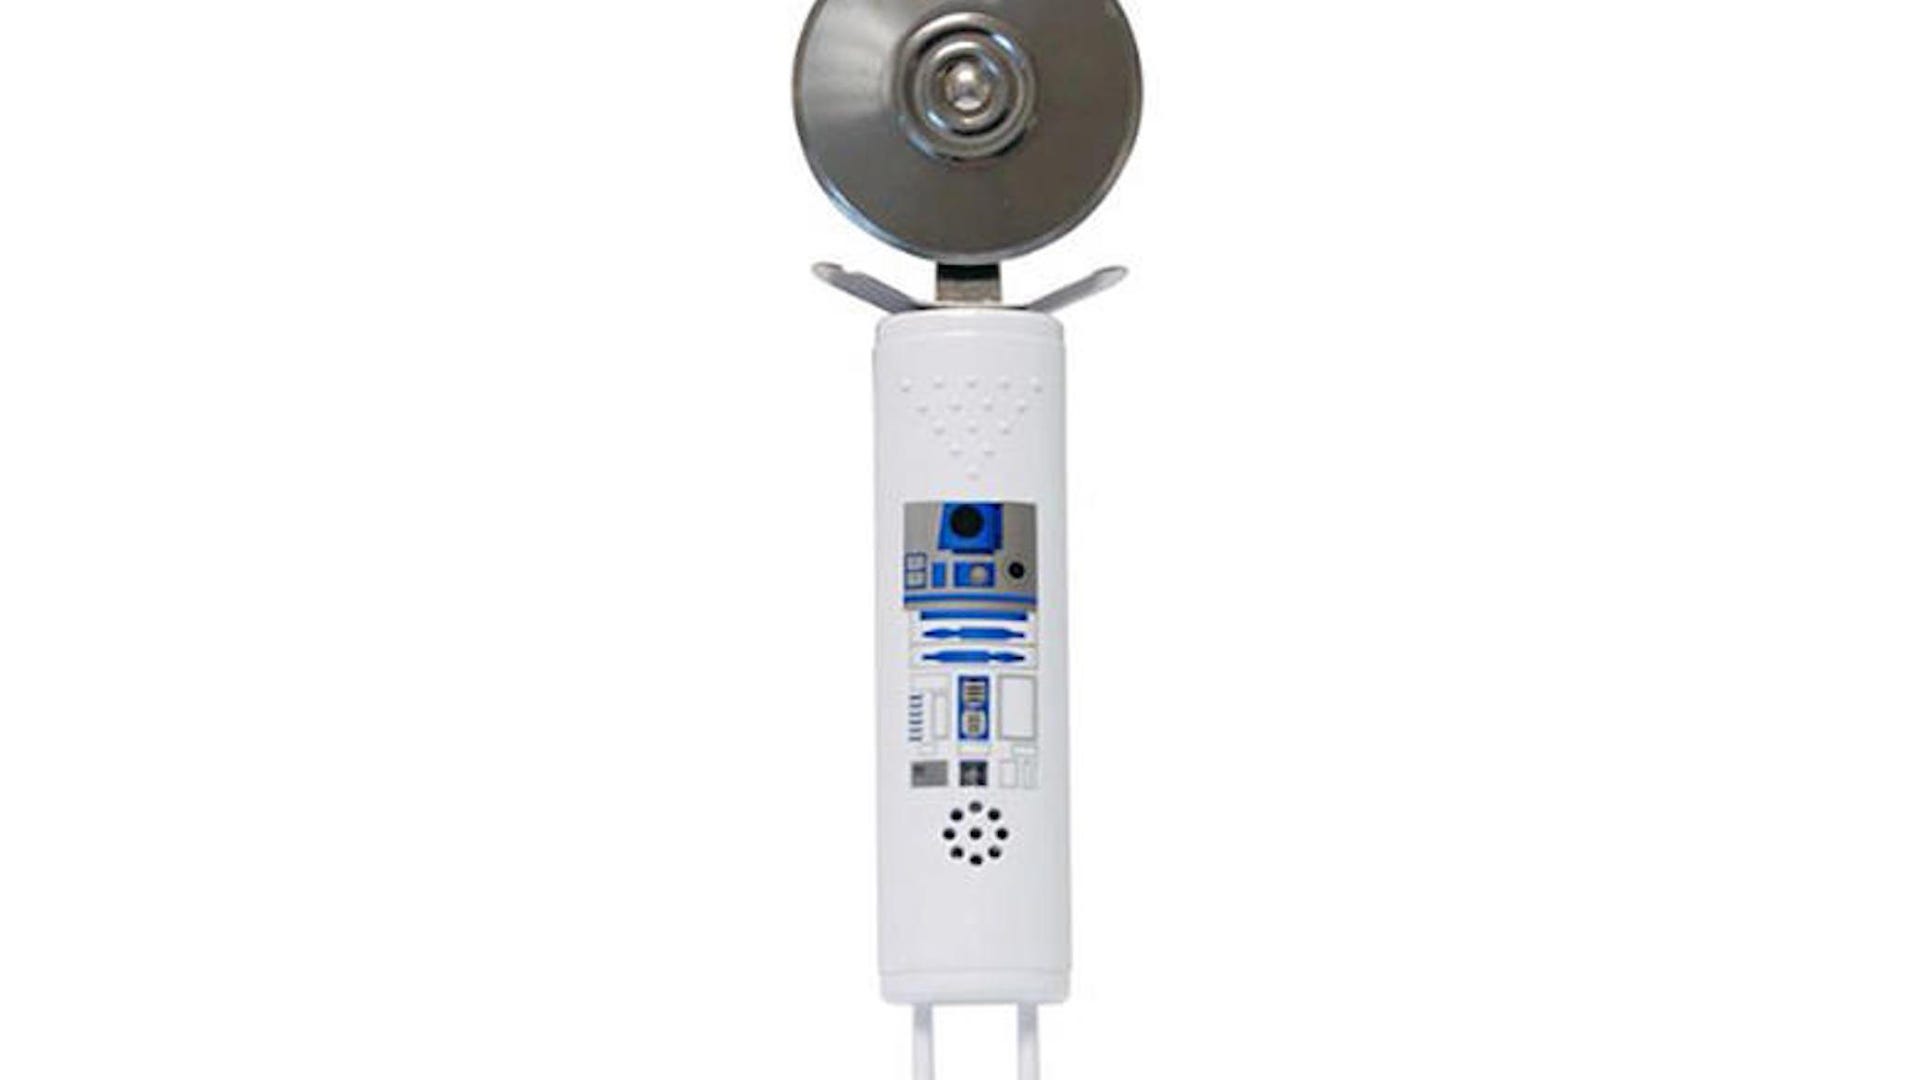 R2-D2 pizza cutter (with sound effects!)